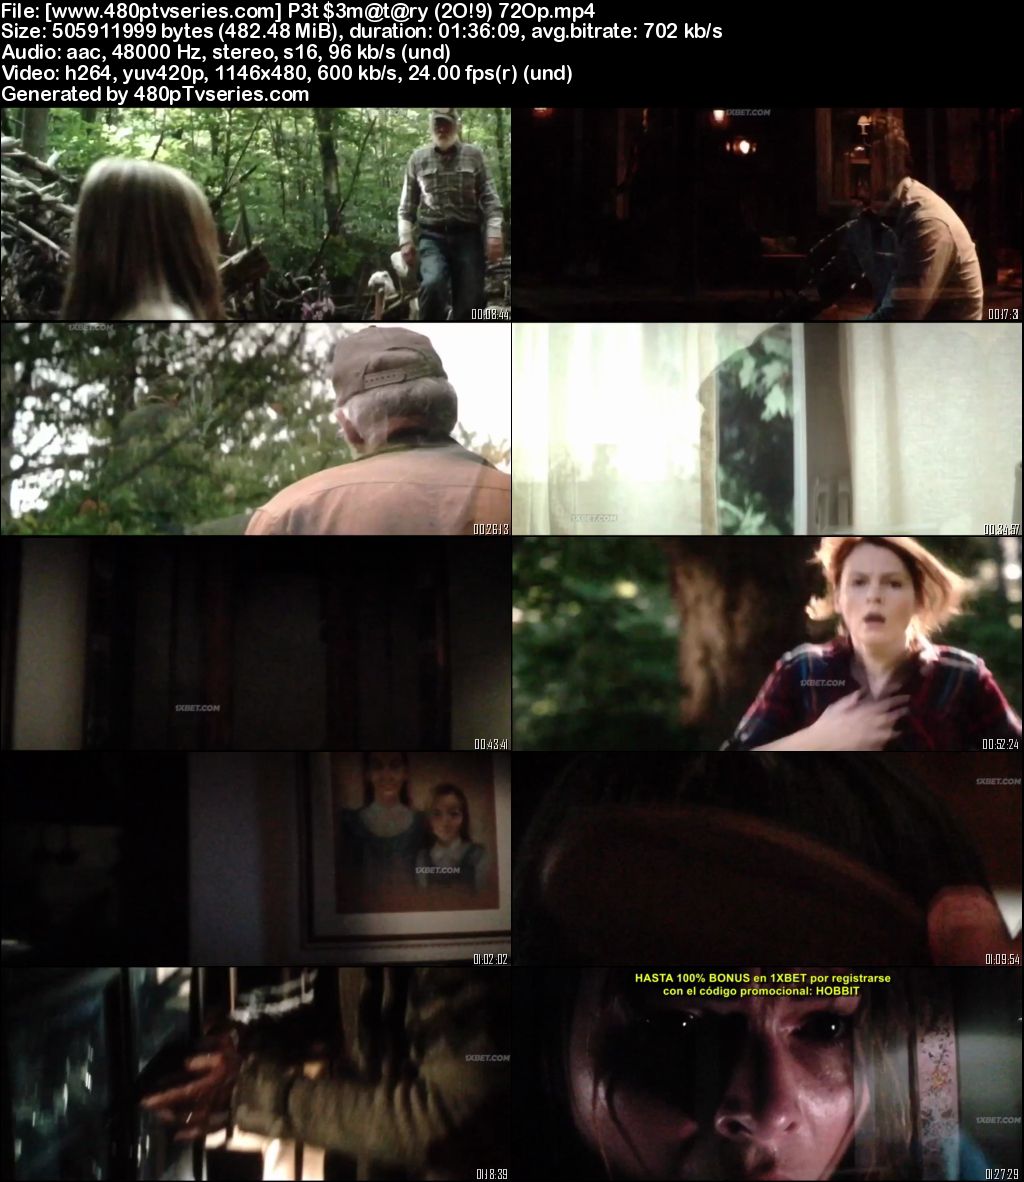 Watch Online Free Pet Sematary (2019) Full English Movie Download 720p 480p HD